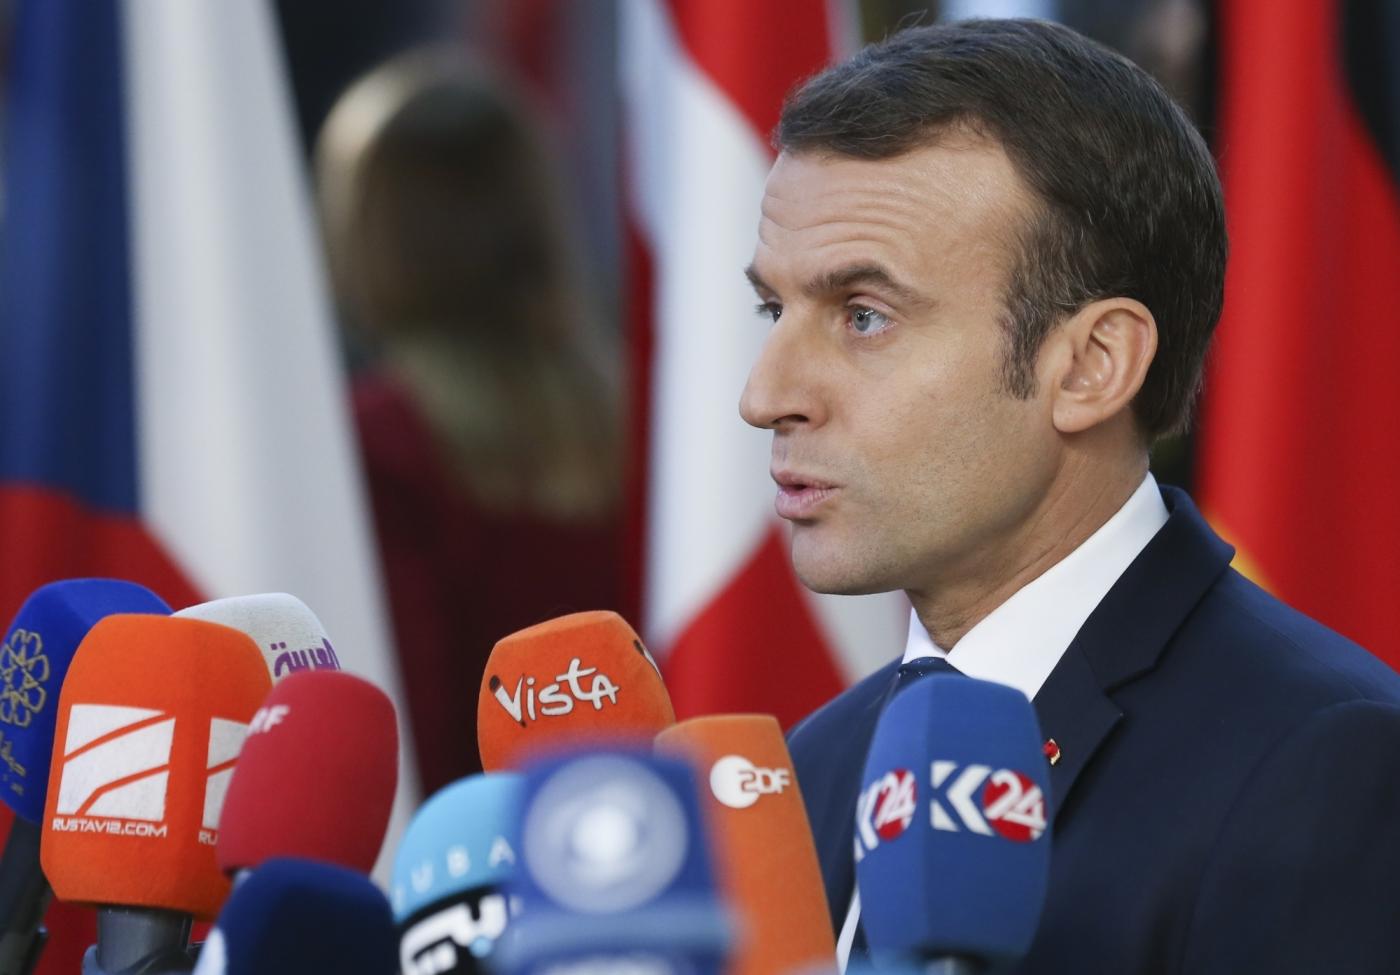 BRUSSELS, Dec. 13, 2018 (Xinhua) -- French President Emmanuel Macron speaks to media upon his arrival at a two-day EU Summit in Brussels, Belgium, Dec. 13, 2018. (Xinhua/Ye Pingfan/IANS) by . 